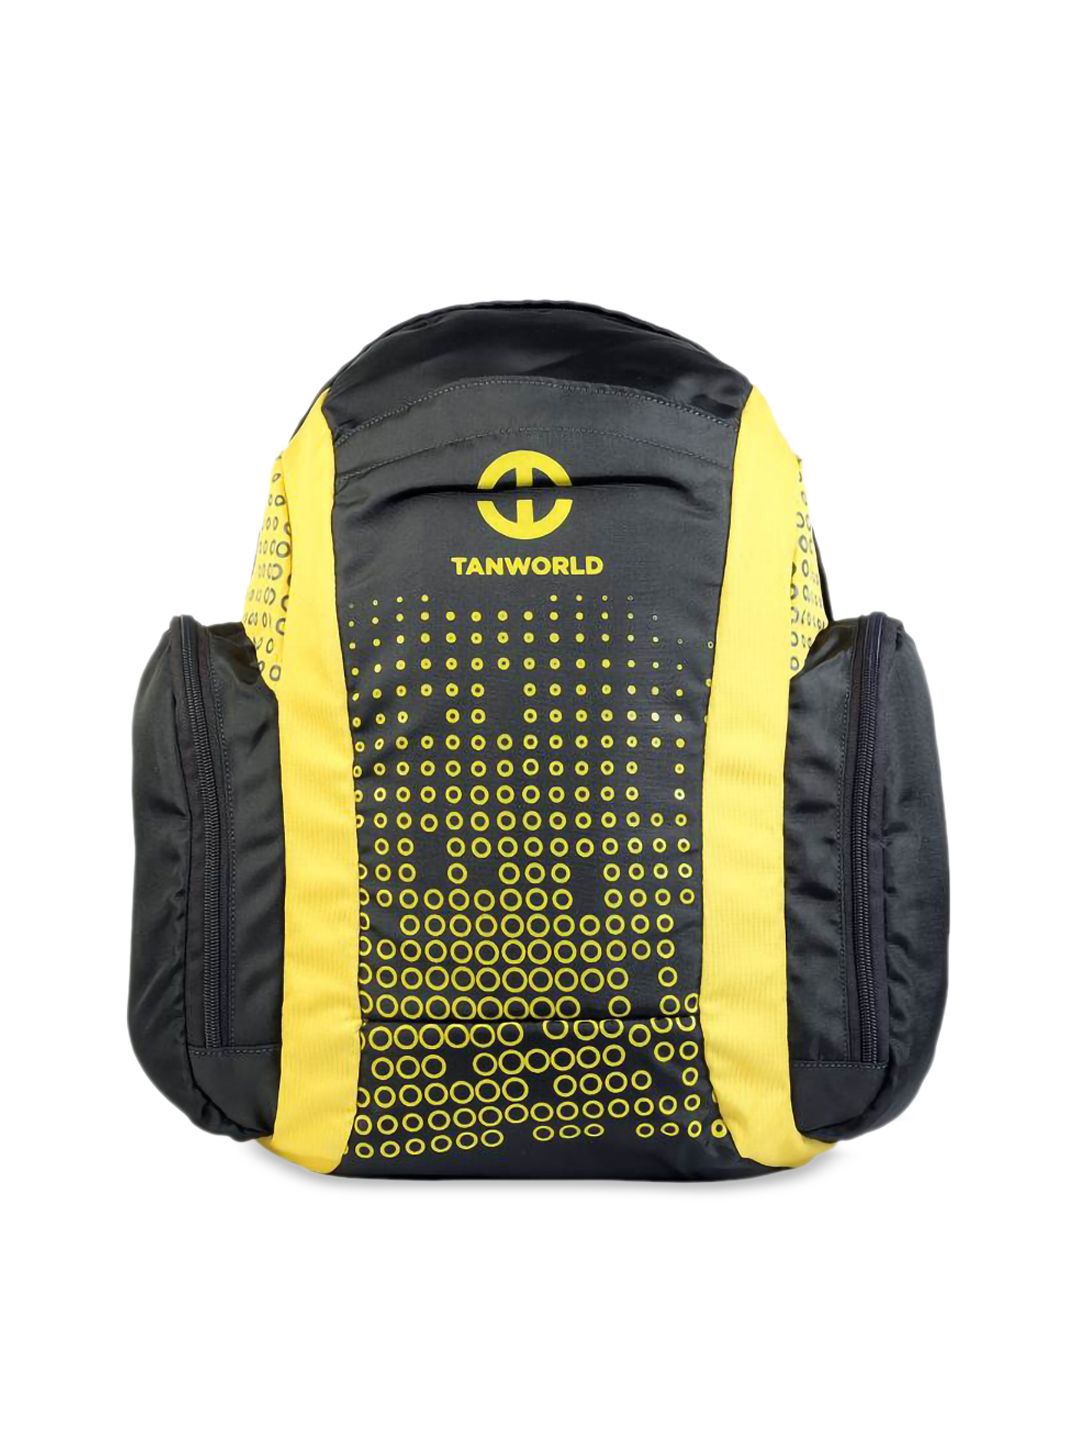 TAN WORLD Unisex Yellow & Black Colourblocked Laptop Backpack Price in India